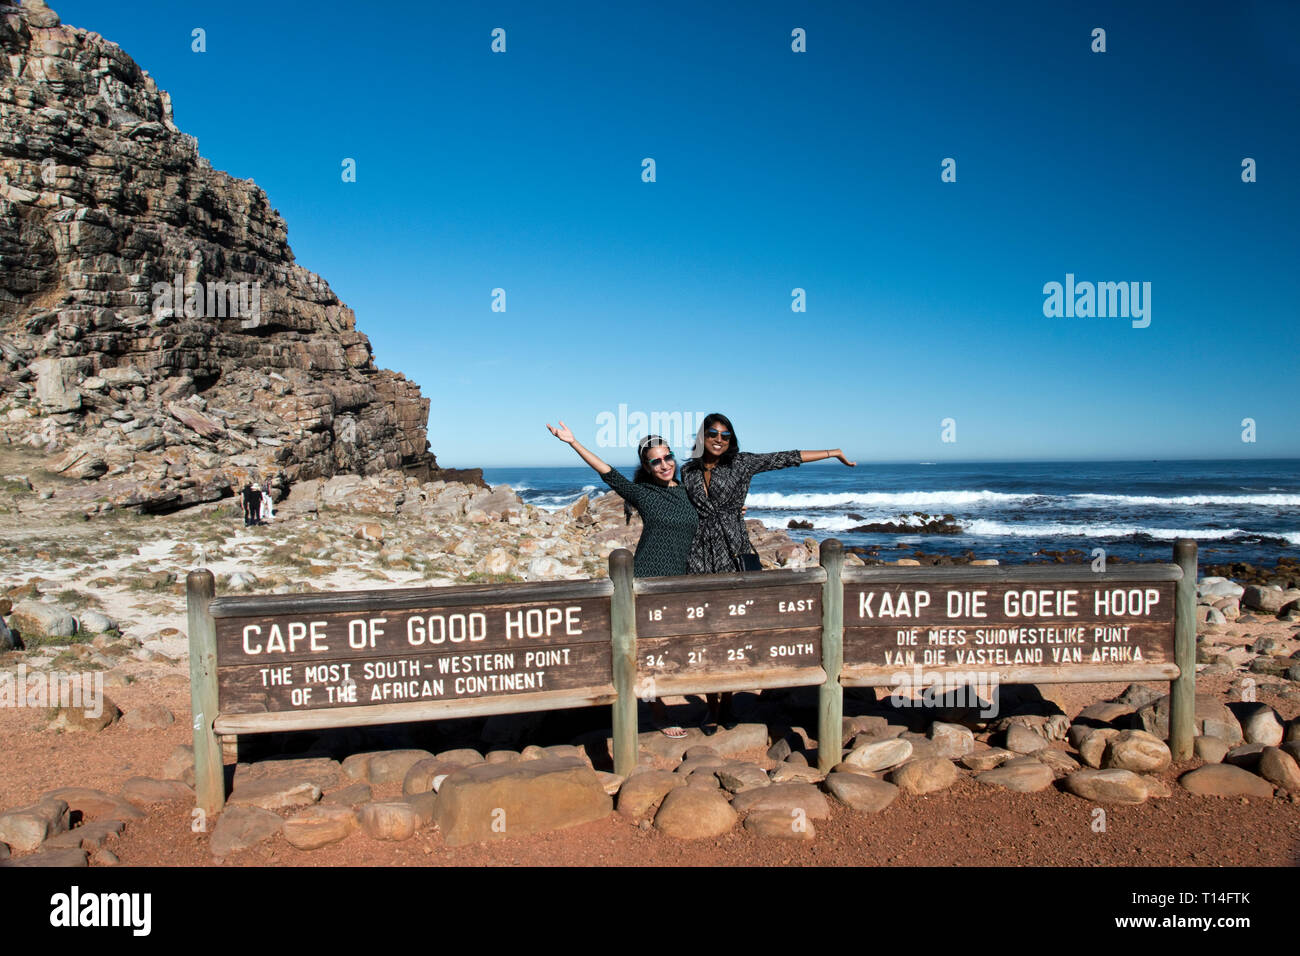 Tourists pose with a sign at the Cape of Good Hope, the most southwestern  spot in Africa, in Table Mountain National Park, South Africa Stock Photo -  Alamy